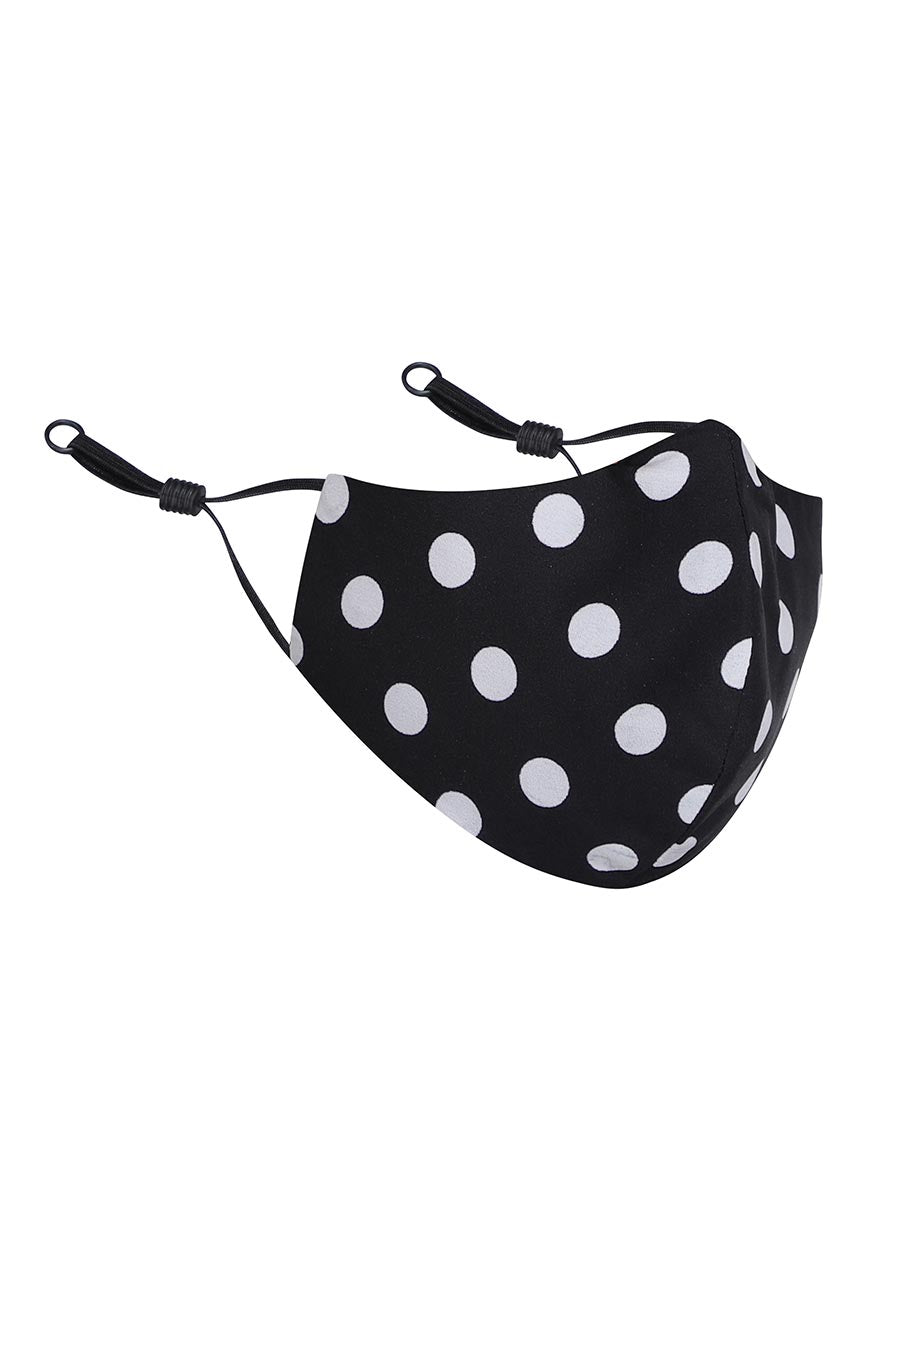 Black 3 Ply Mask With Polka Dots